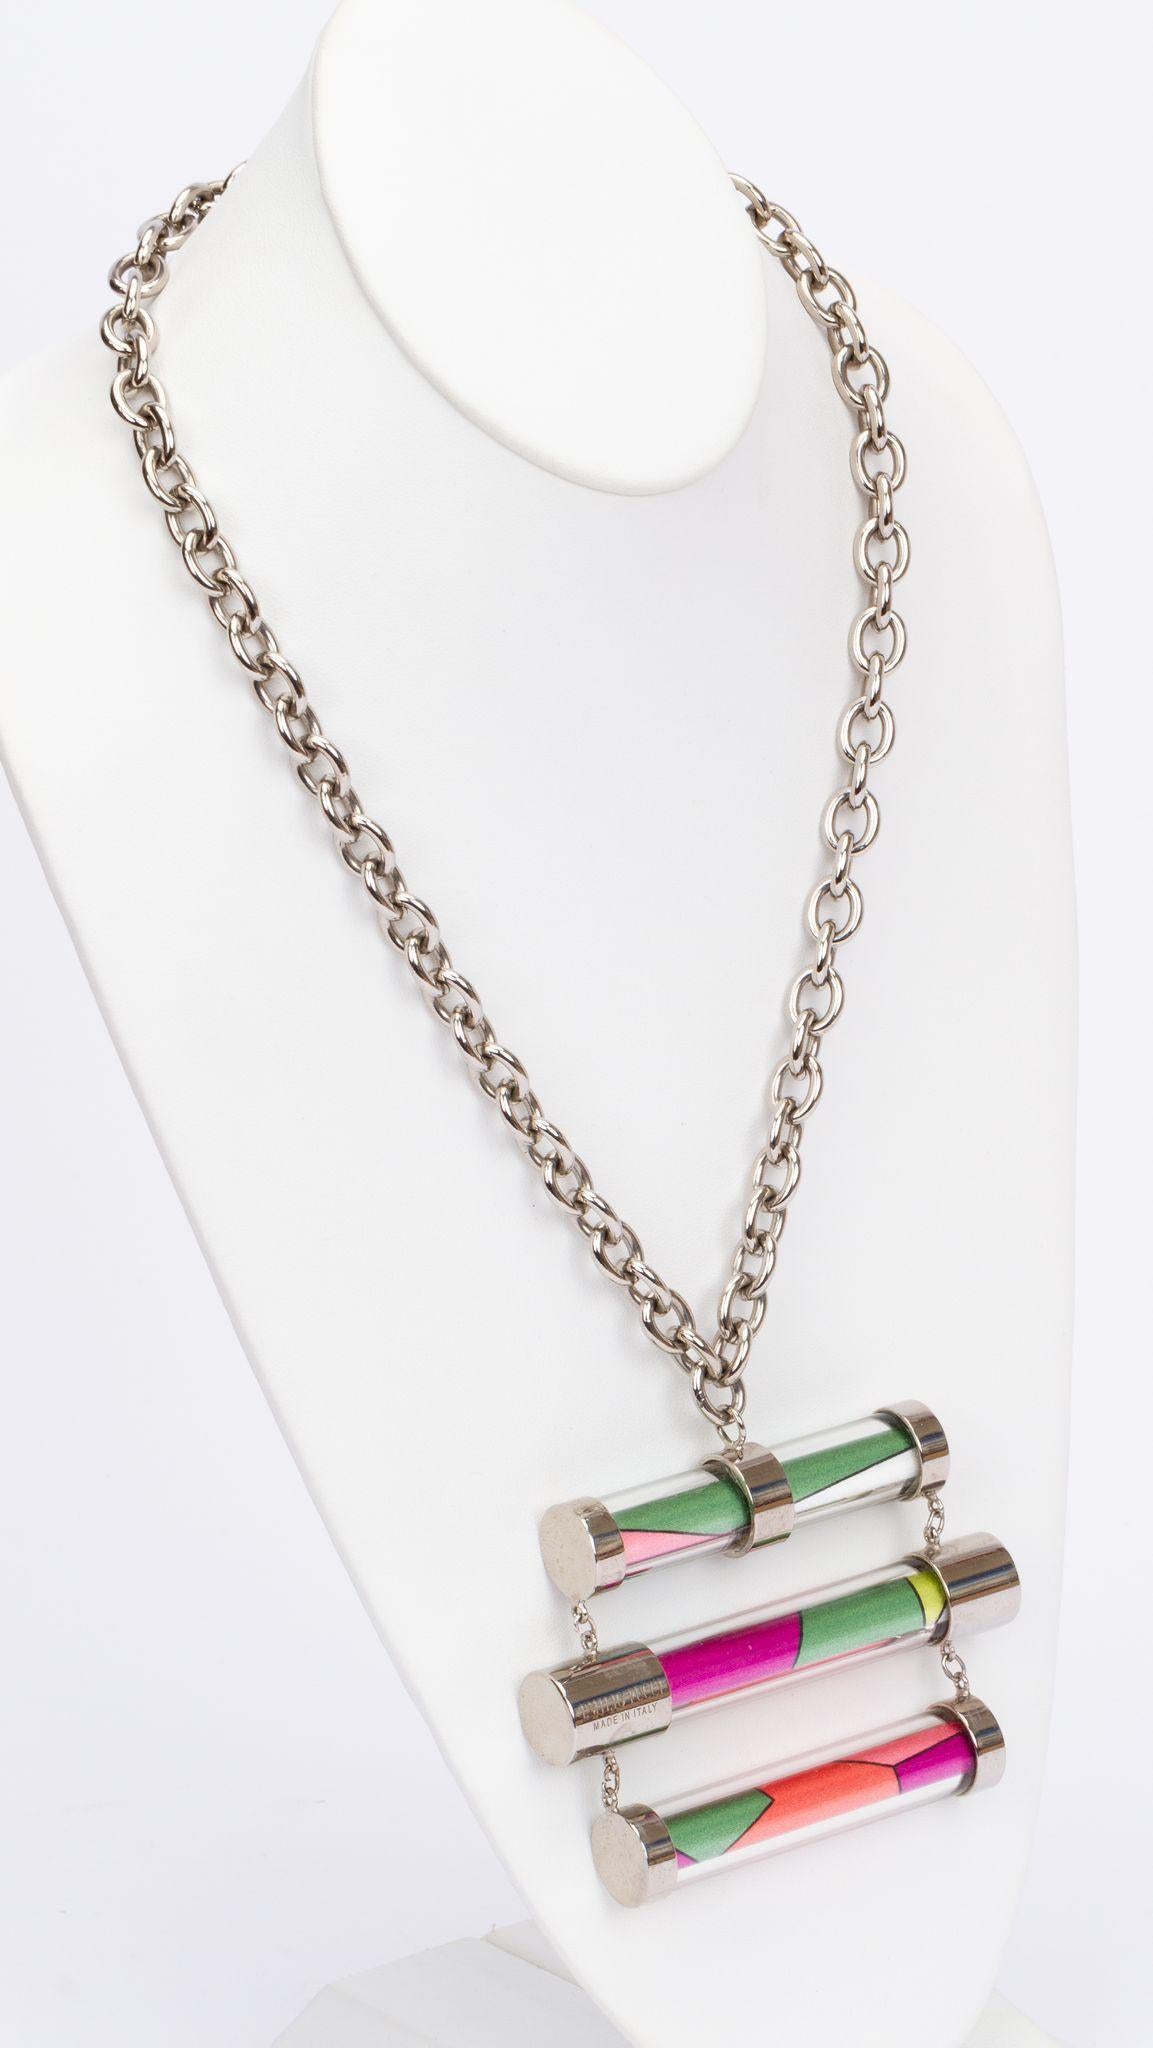 Pucci new silver necklace with lucite pendant with silk inlay. Pendant dimensions: 2.75